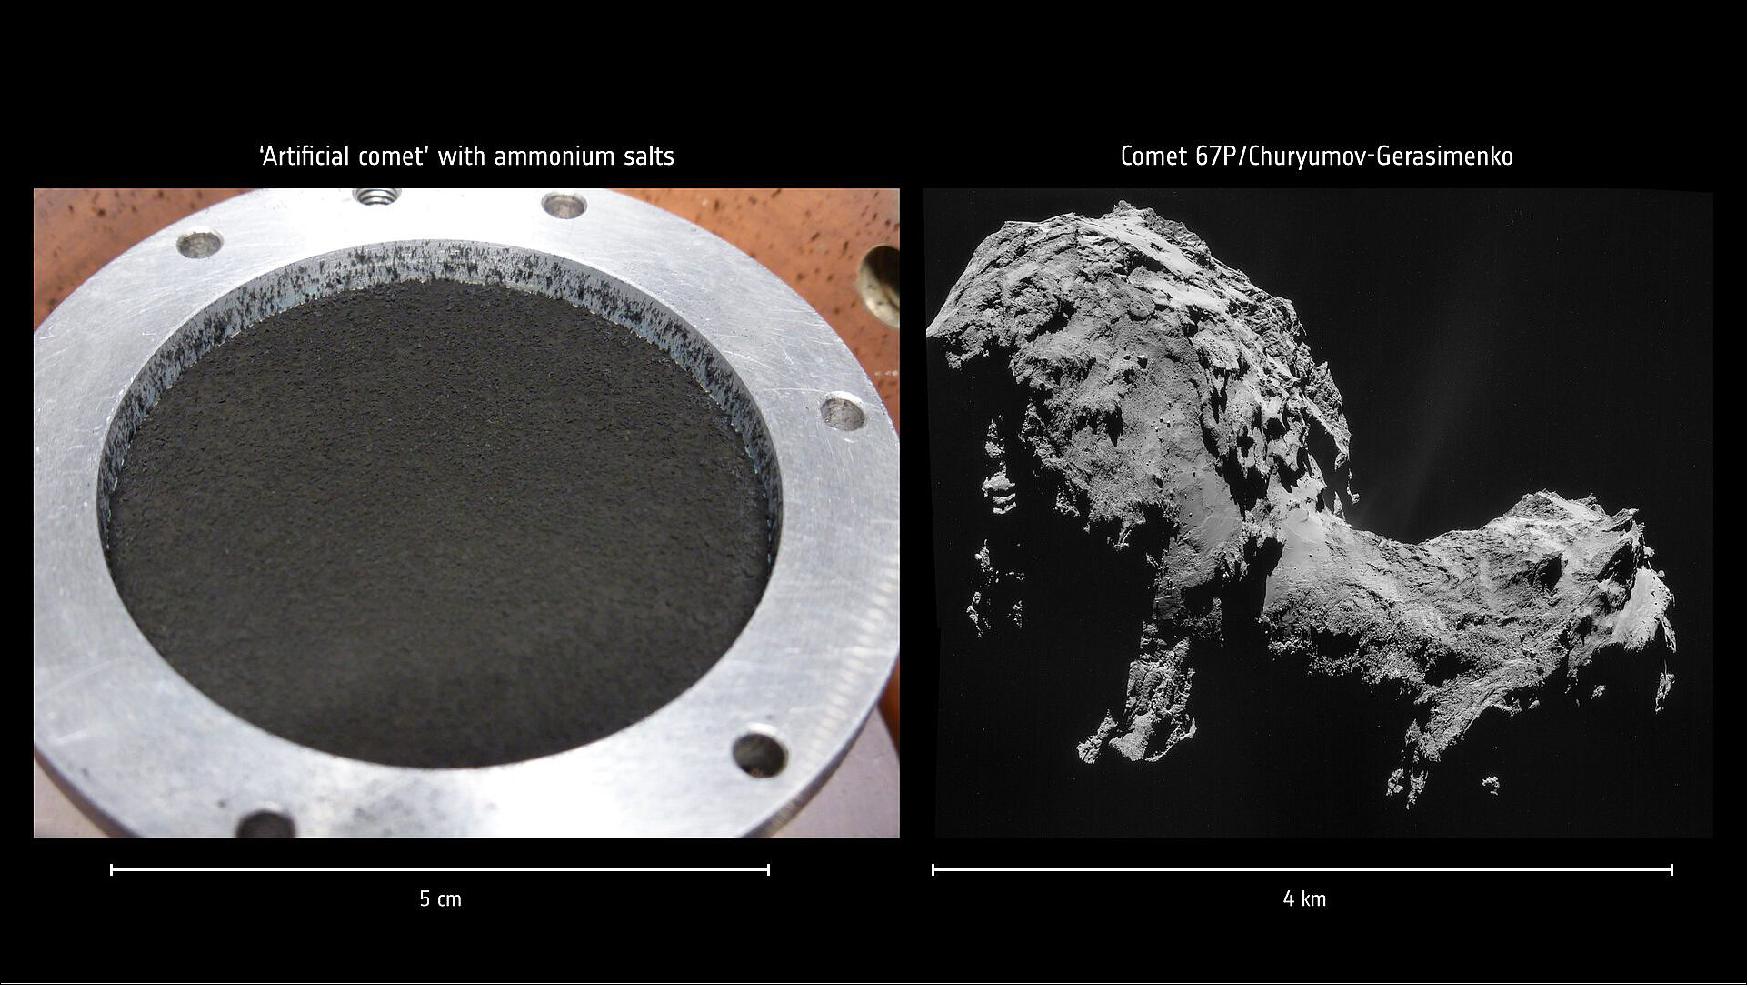 Figure 45: As VIRTIS mapped the comet during the first half of Rosetta's mission, the data revealed how its surface is as dark as coal, and slightly reddened by a mixture of carbon-based compounds and opaque minerals. The instrument also spotted local patches of water and carbon dioxide ice, along with a puzzling but almost ubiquitous absorption feature around the infrared wavelength of 3.2 µm. The nature of the compound that could cause such a feature, however, remained unclear until now [image credit: O. Poch, IPAG, UGA/CNES/CNRS (left); ESA/Rosetta/NavCam – CC BY-SA IGO 3.0 (right)]